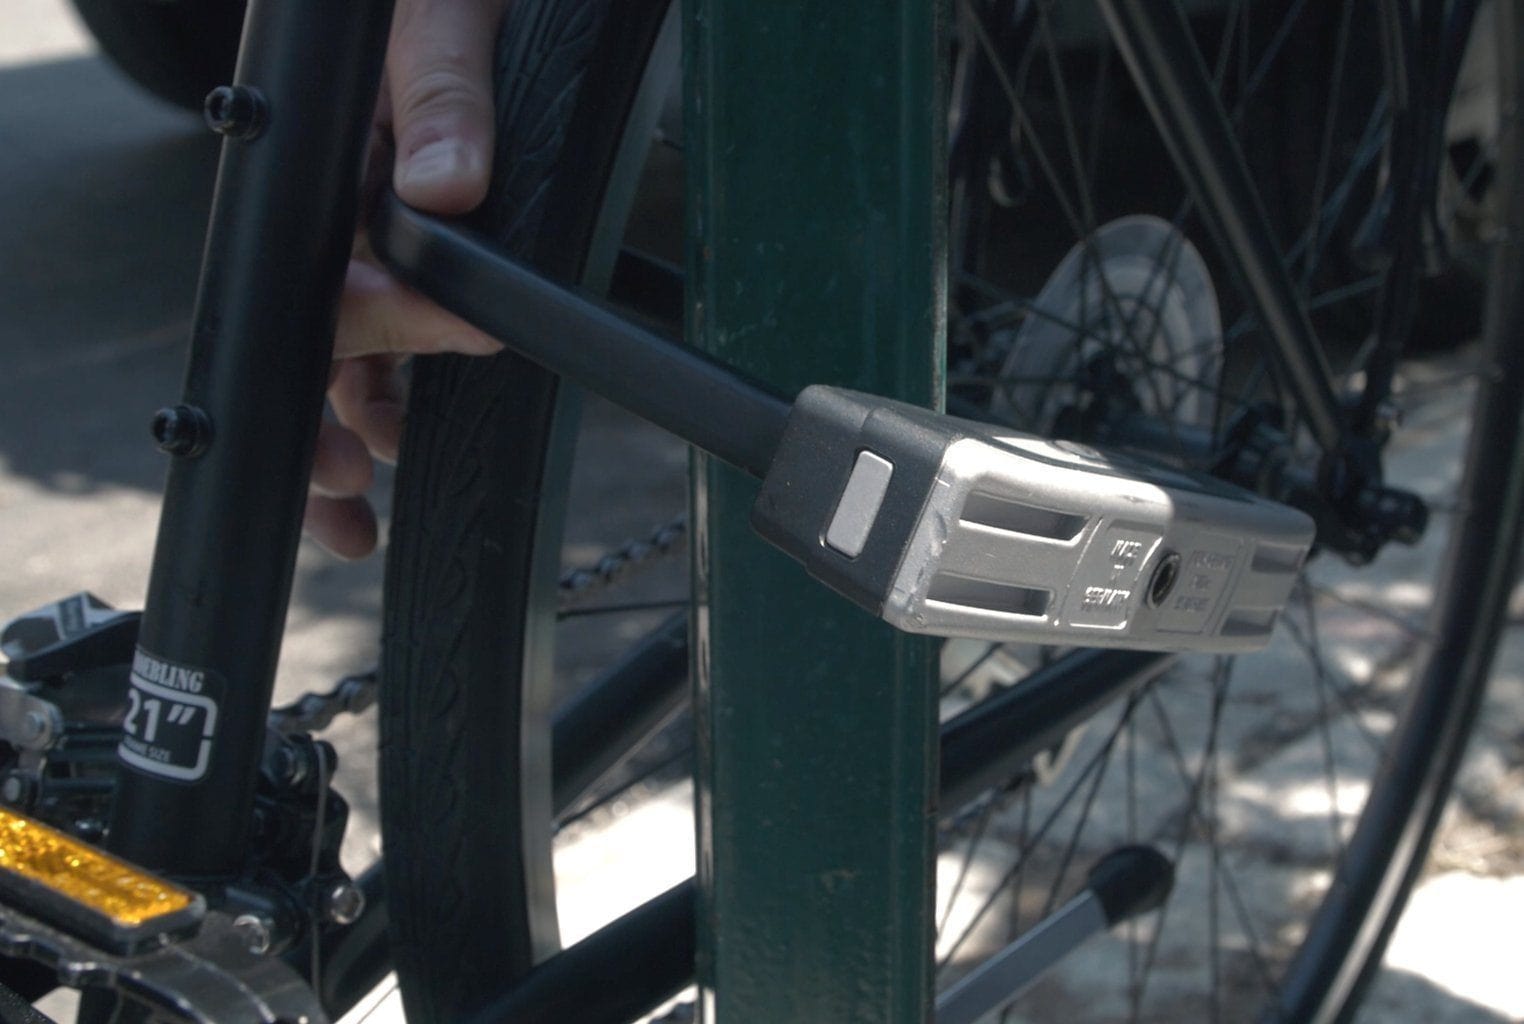 How to Lock Your Bike